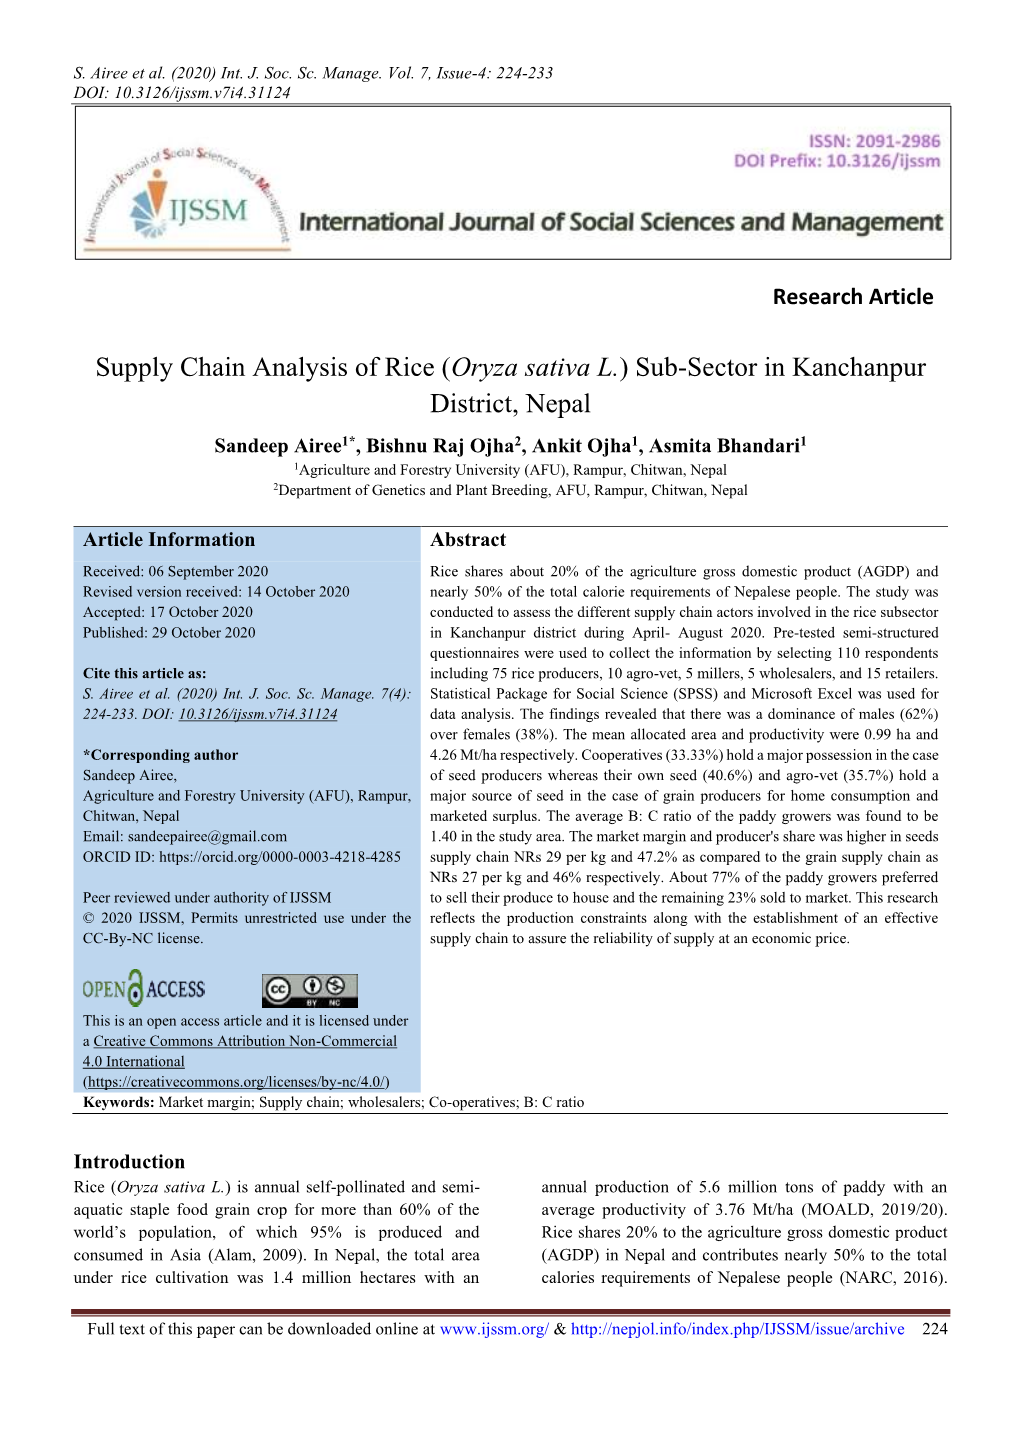 Supply Chain Analysis of Rice (Oryza Sativa L.) Sub-Sector In